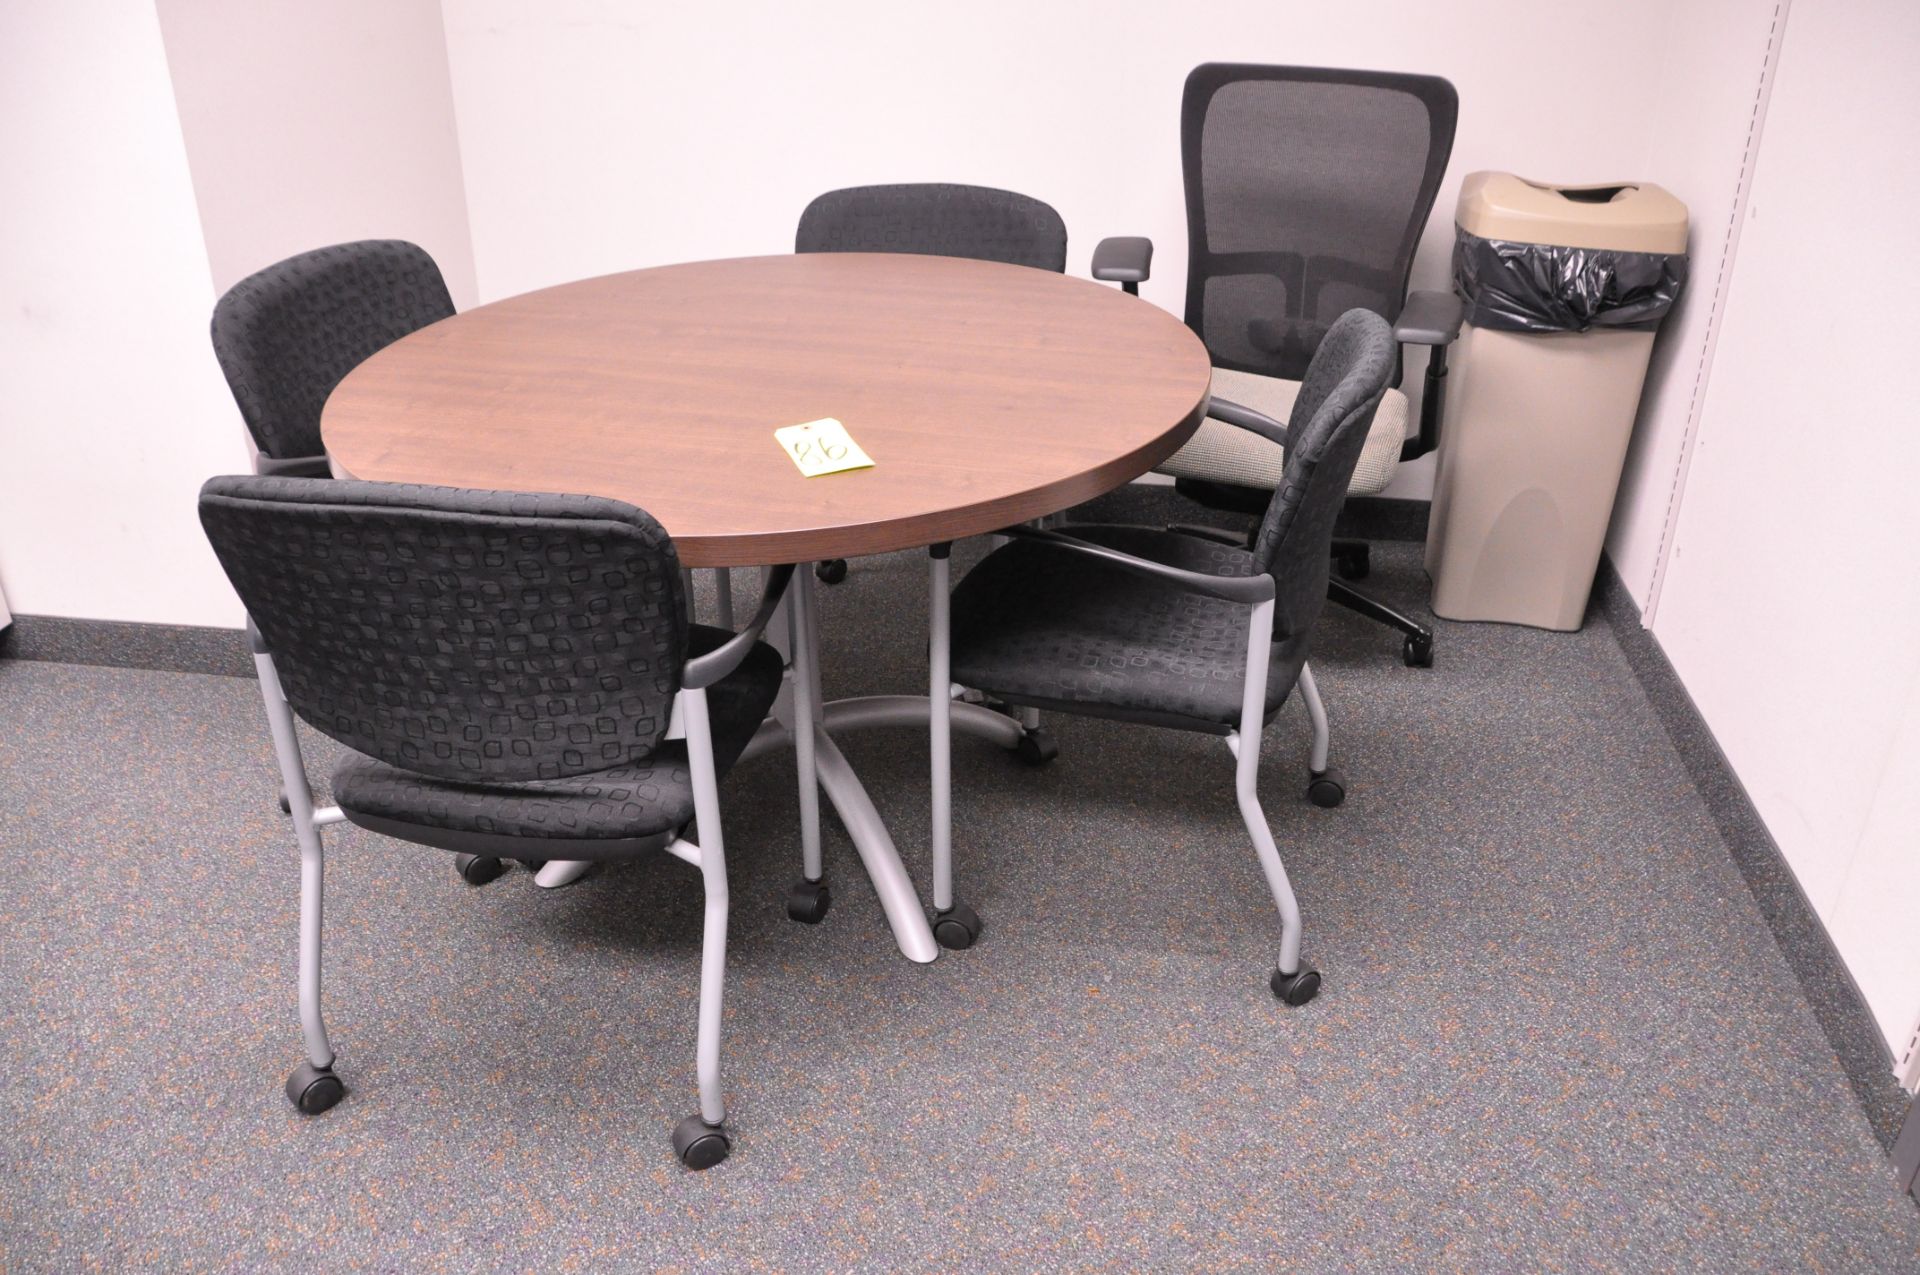 Lot-(1) 47" Round Conference Table with (5) Various Rolling Arm Chairs, (Located 1st Floor Offices)